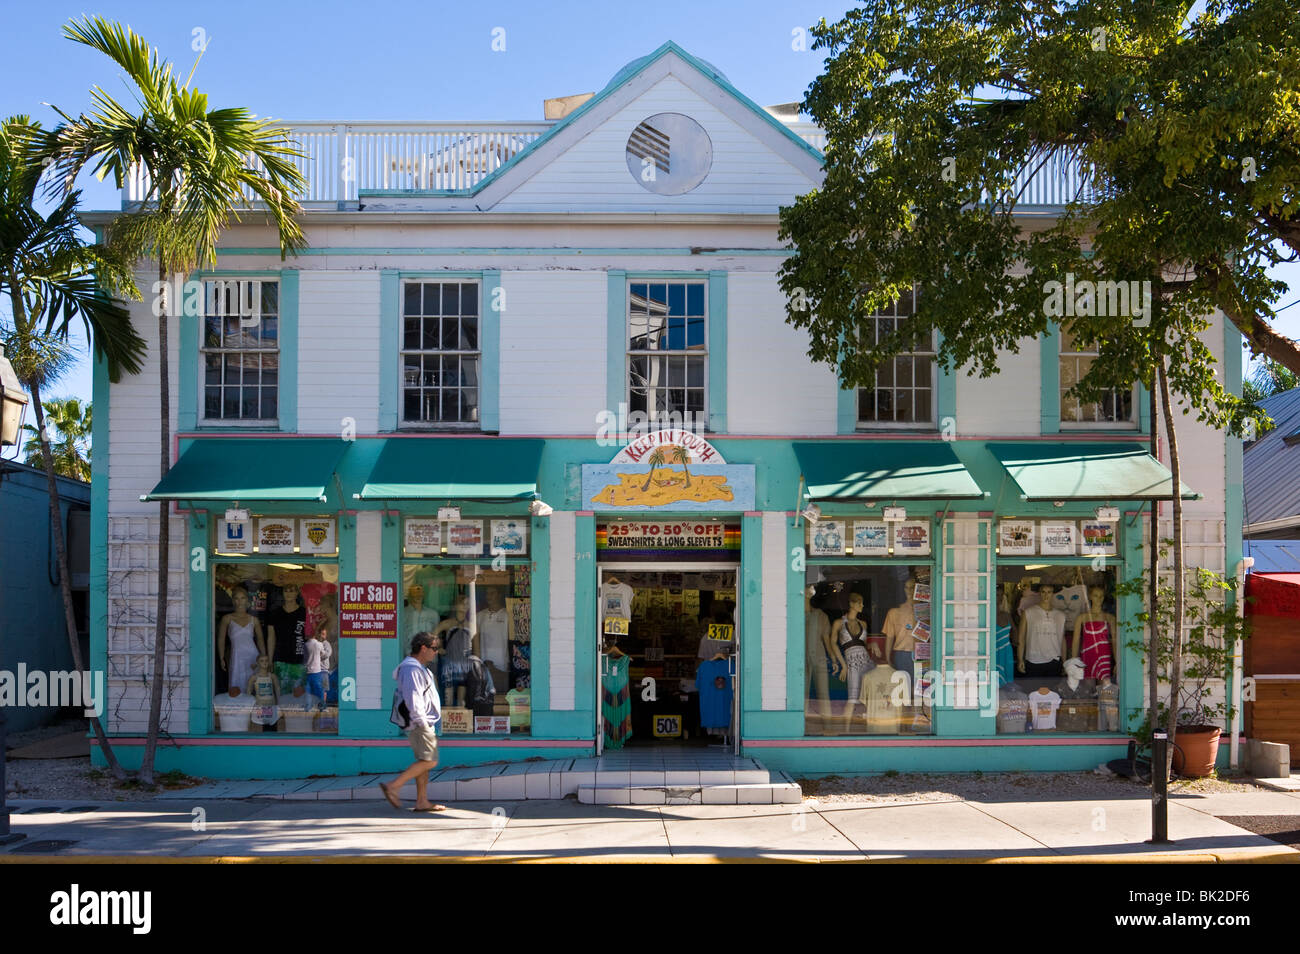 Keep In Touch store on Duval Street, Key West, Florida, USA. Stock Photo